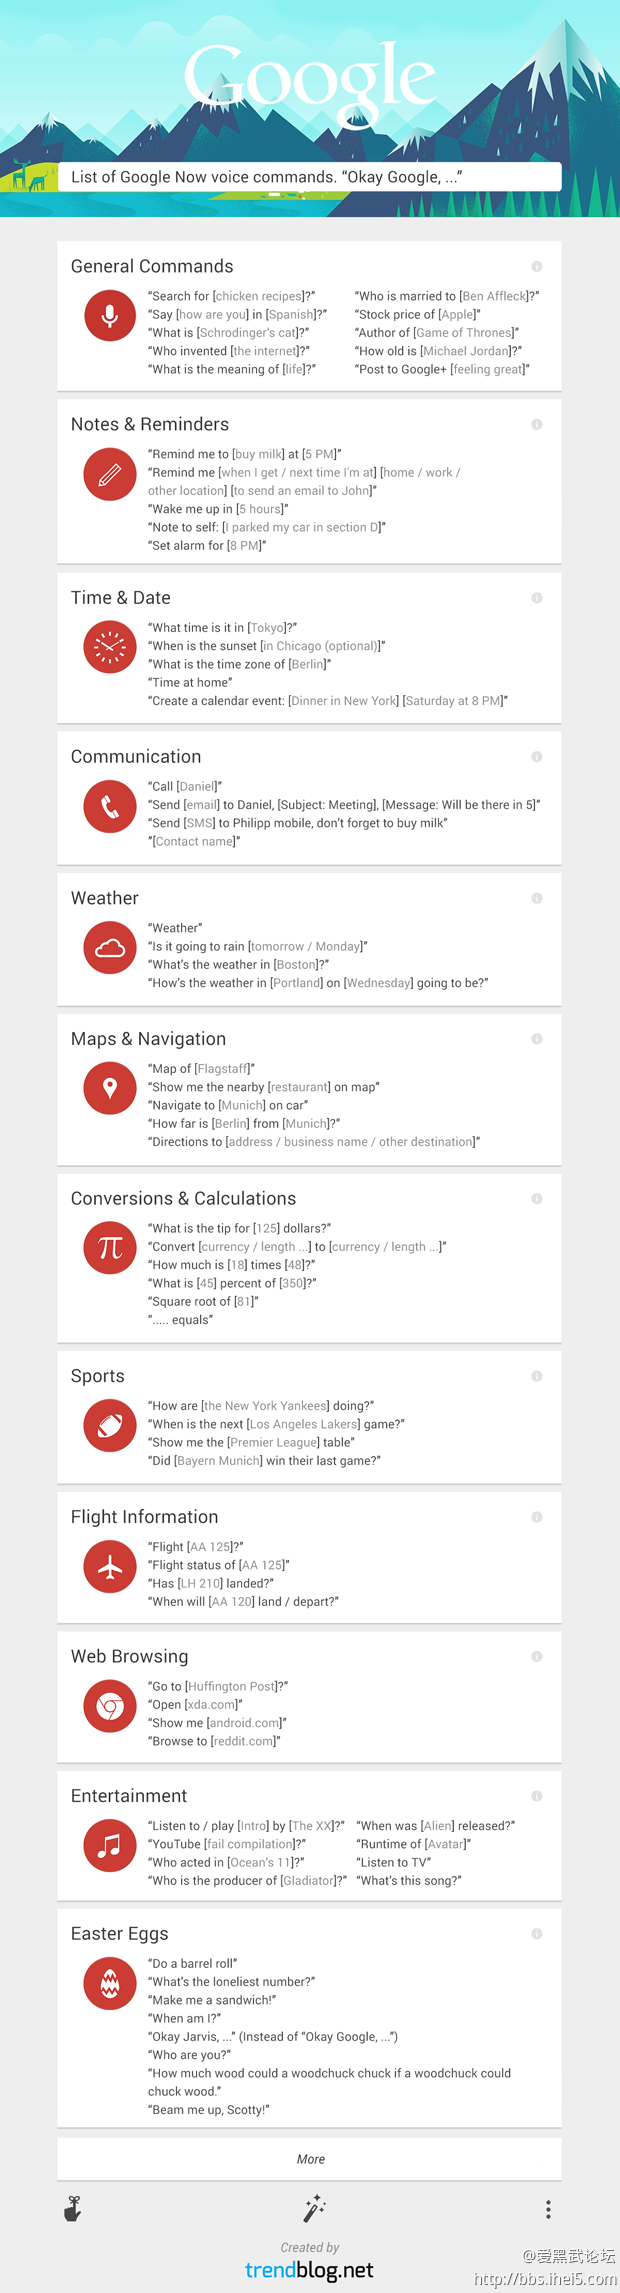 list-google-now-commads-infographic-v3.png